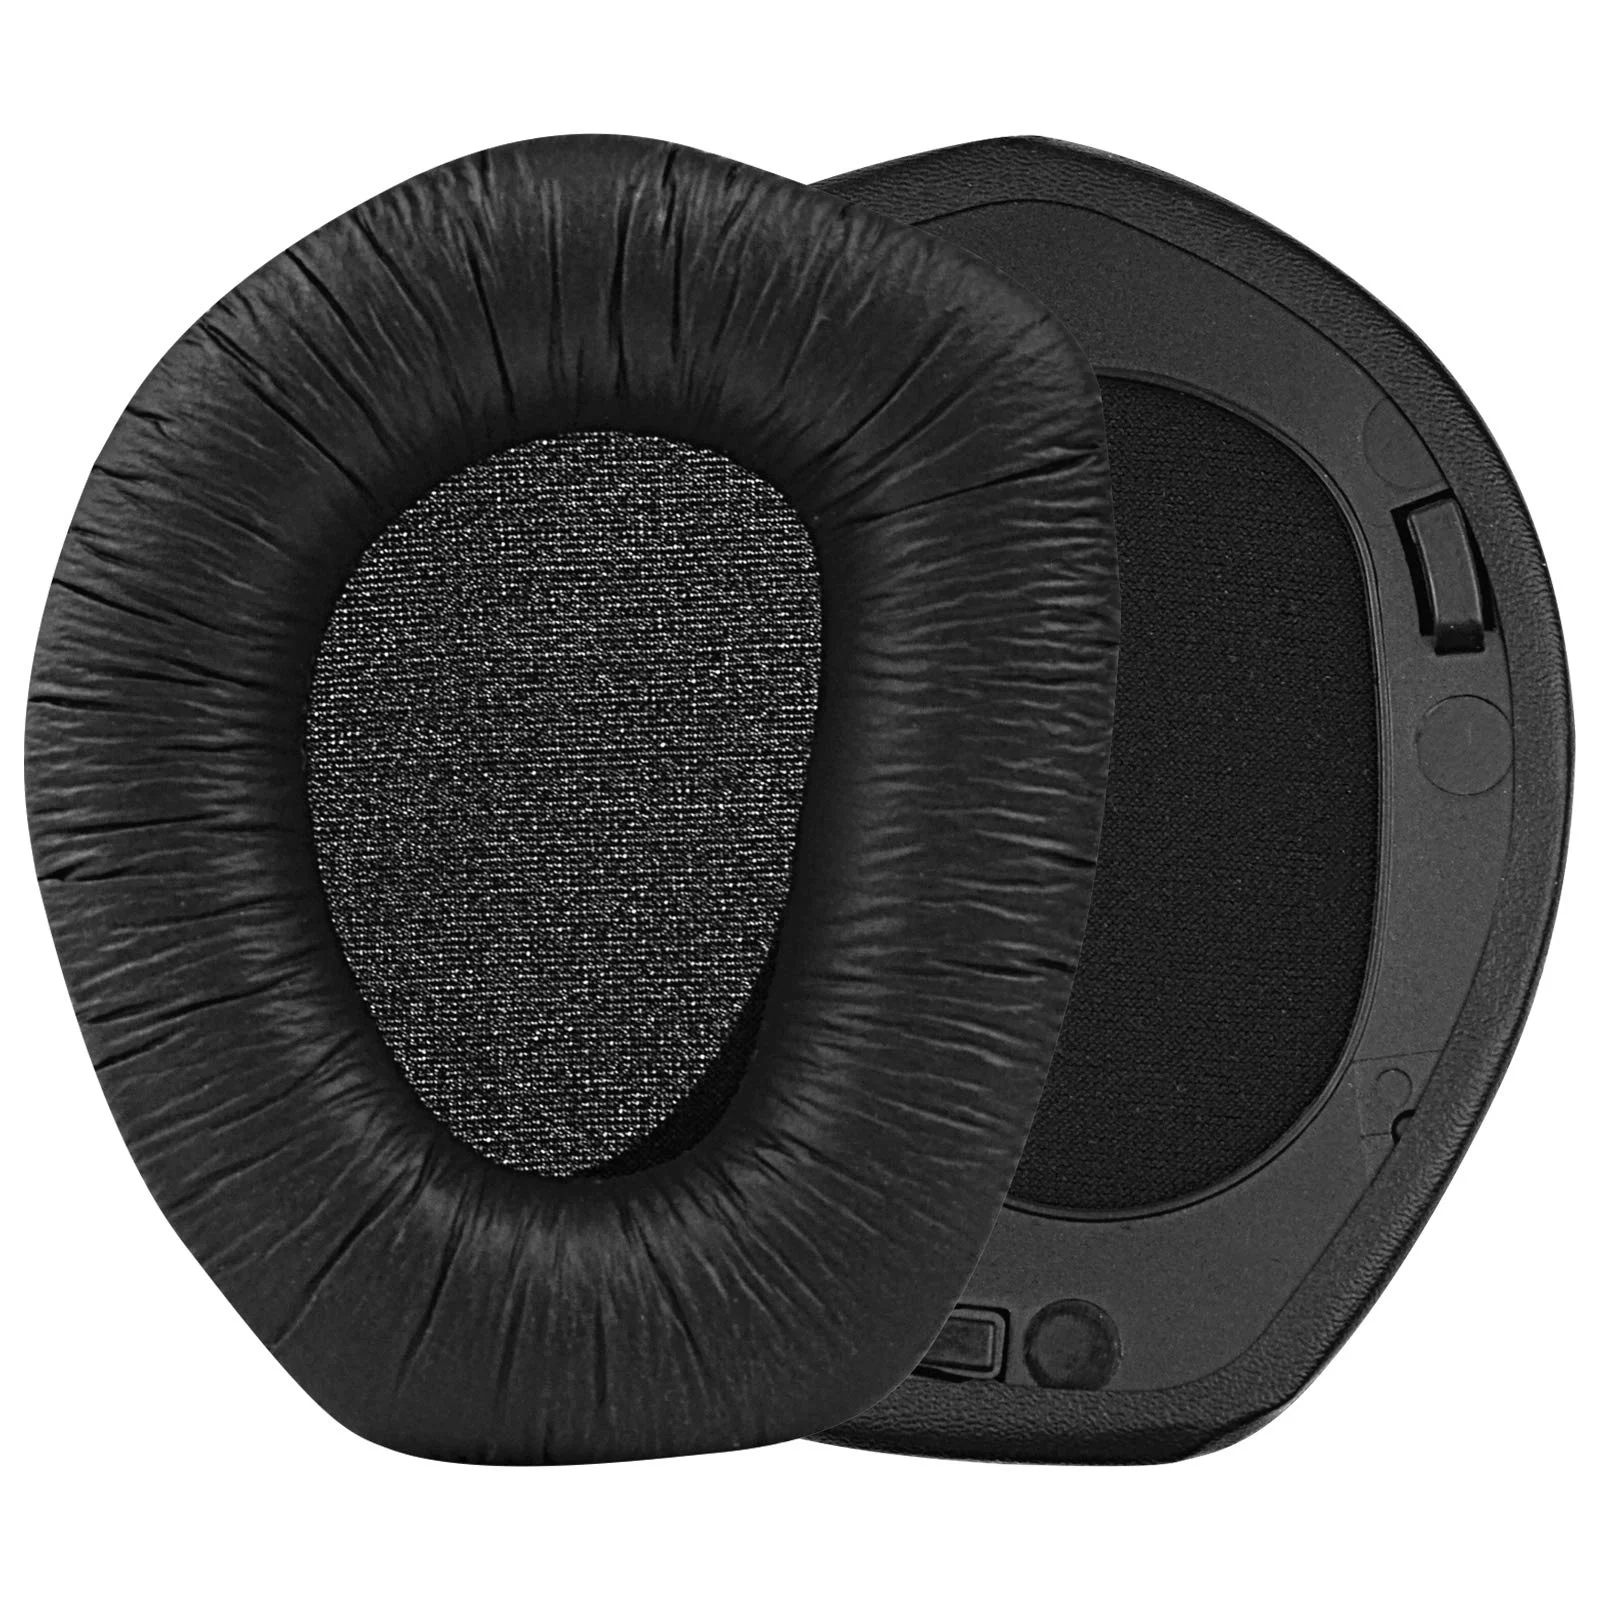 

Replacement Earpads Ear Pads Cushion Foam For Sennheiser HDR165 HDR175 HDR185 HDR195 HDR RS165 RS175 RS185 RS195 RF Headphones